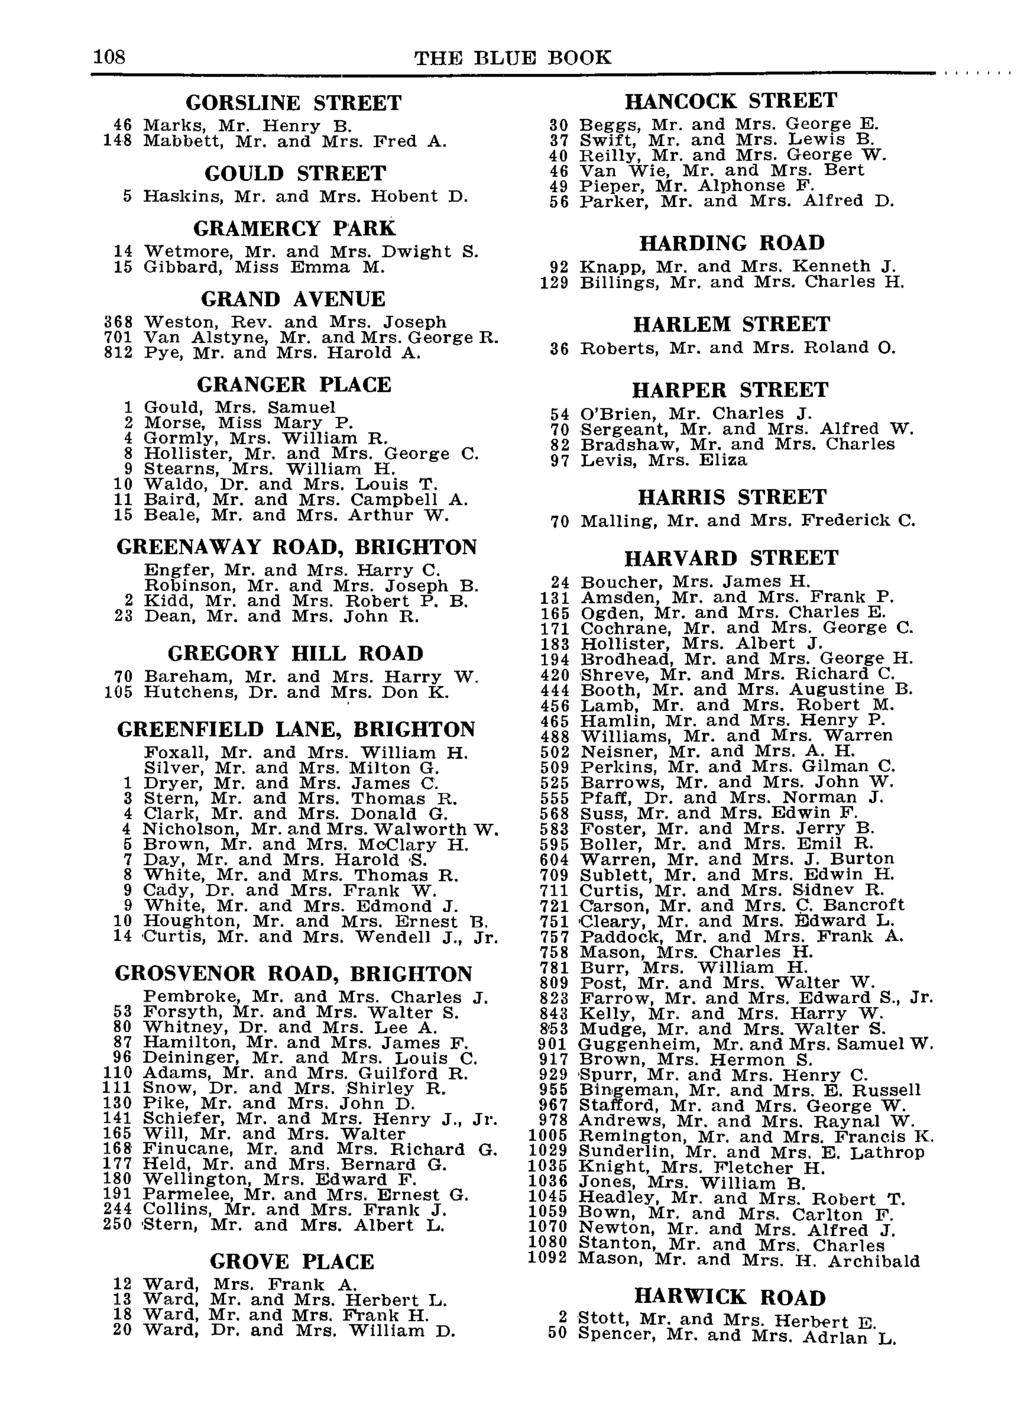 108 THE BLUE BOOK GORSLINE STREET 46 Marks, Mr. Henry B. 148 Mabbett, Mr. and Mrs. Fred A. GOULD STREET 5 Haskins, Mr. and Mrs. Hobent D. GRAMERCY PARK 14 Wetrnore, Mr. and Mrs. Dwight S.